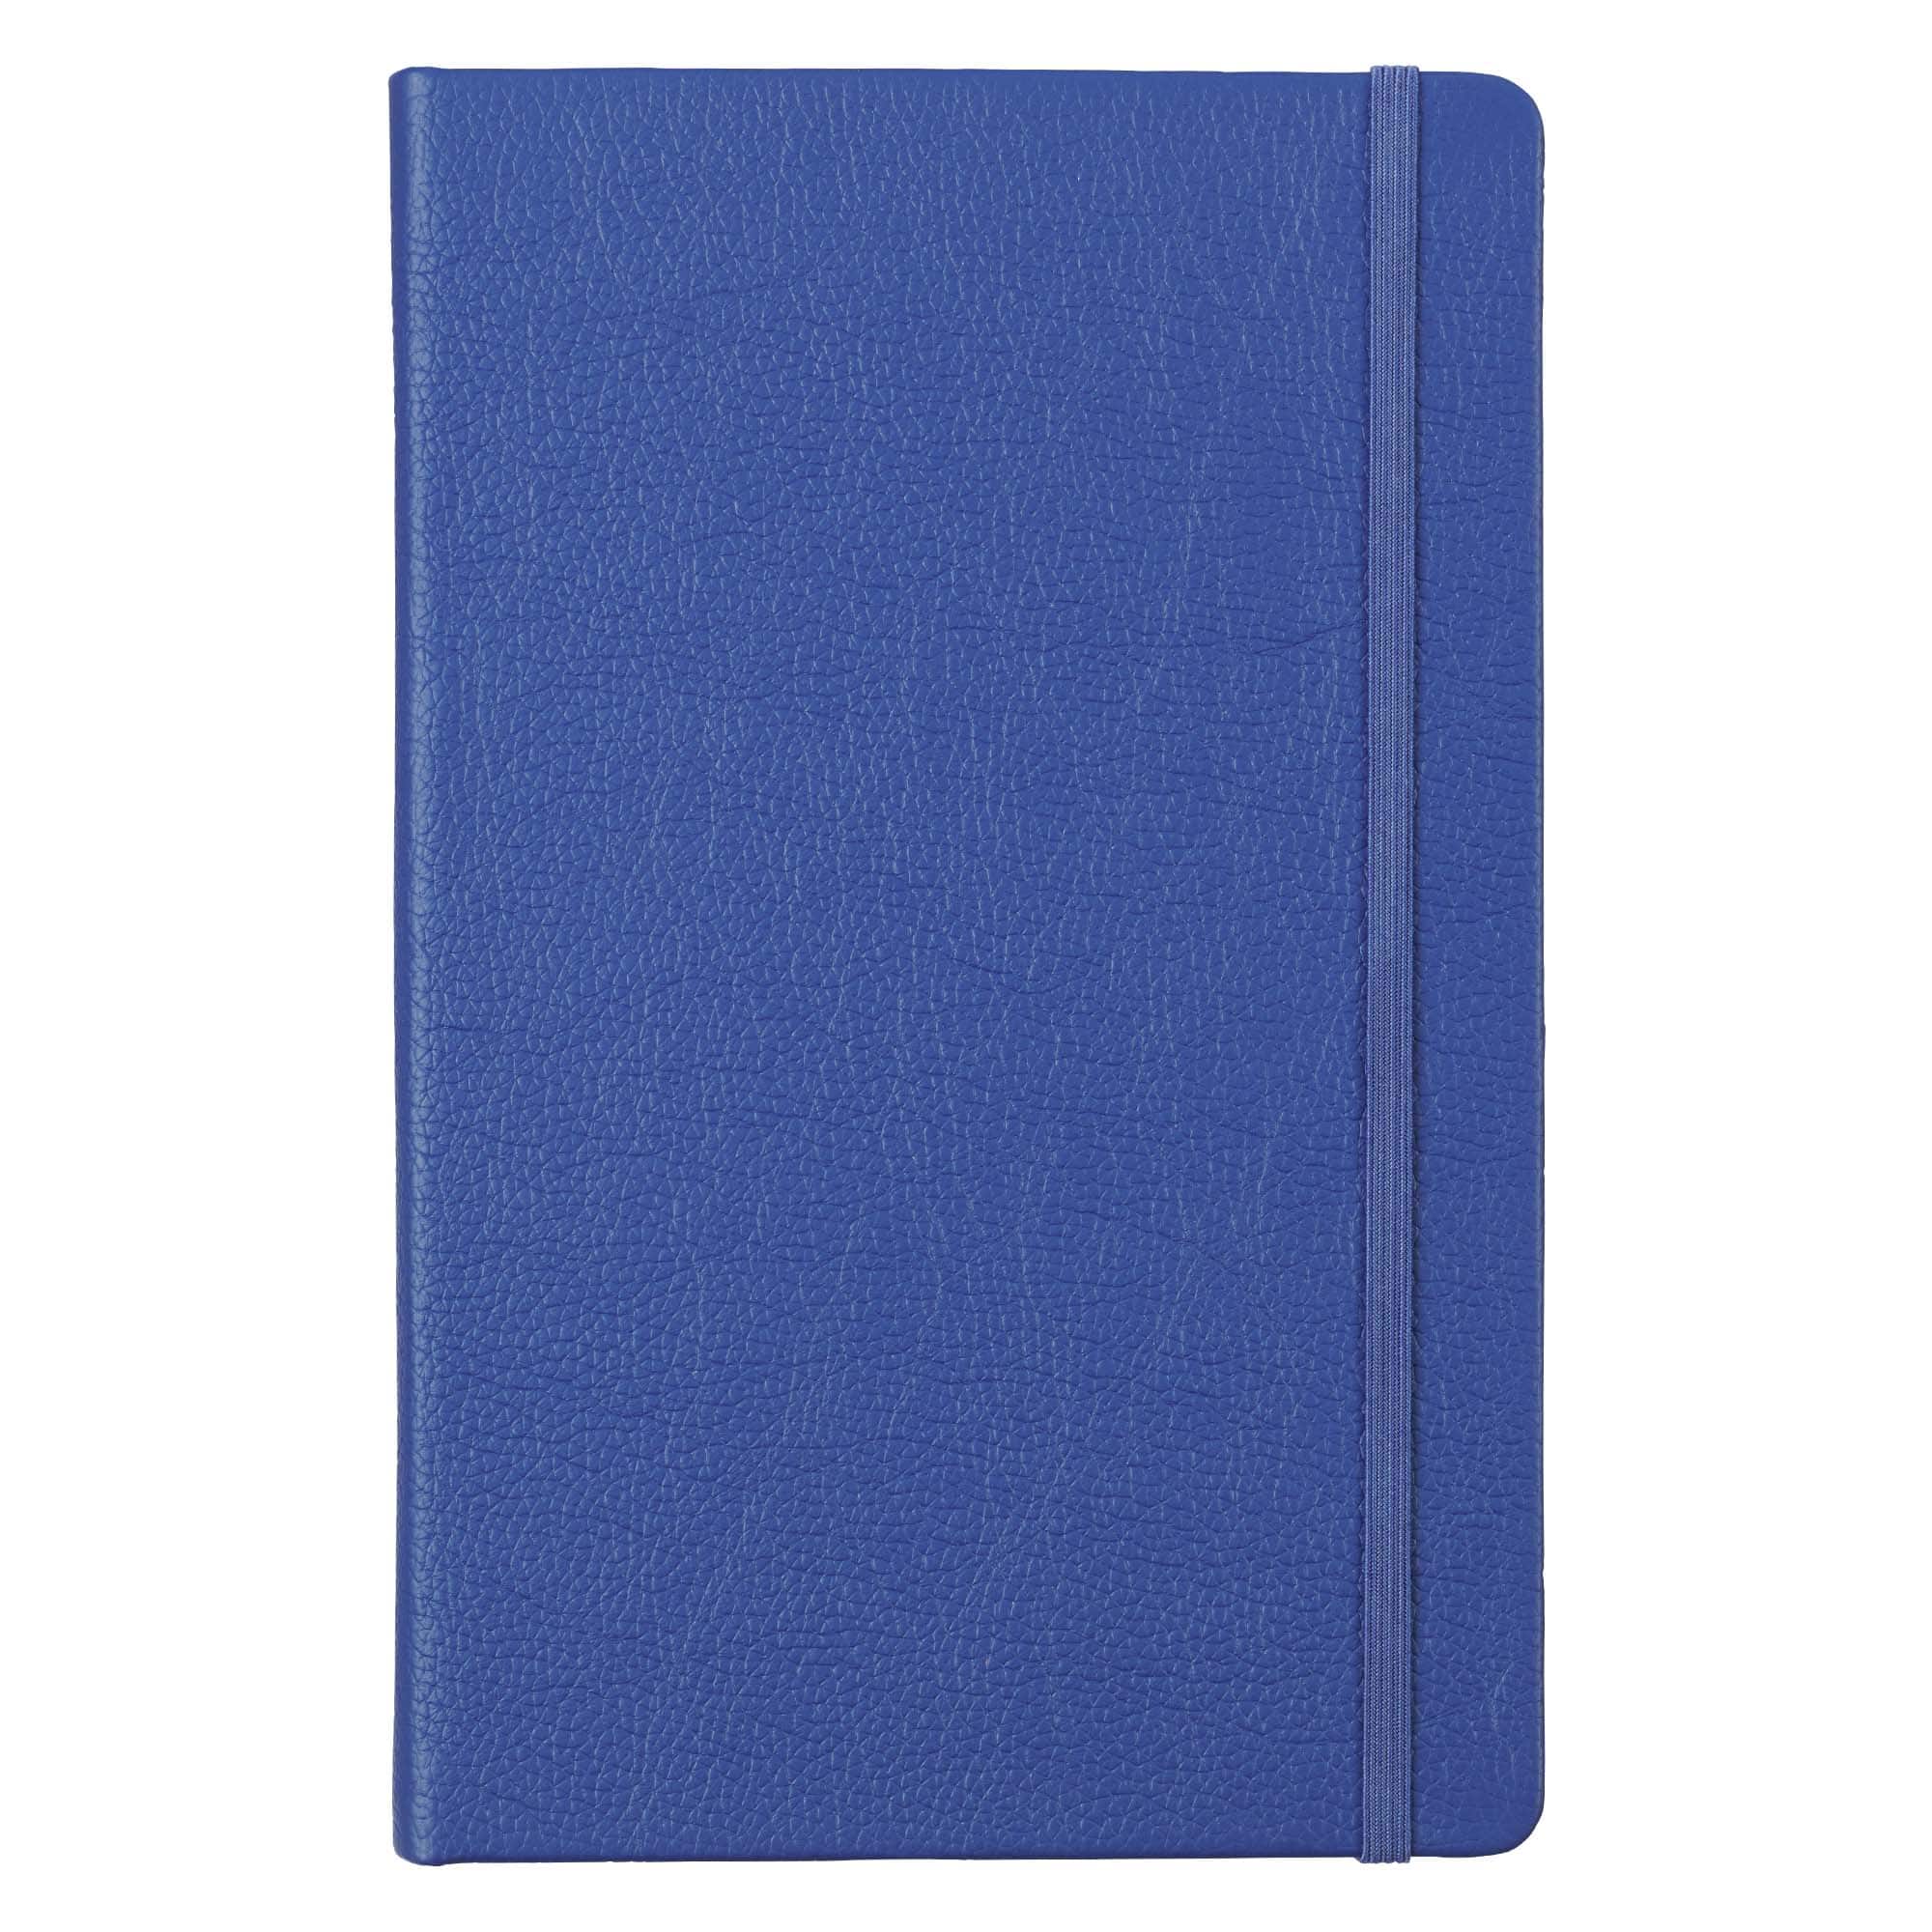 Pacific Blue Leather Notebook